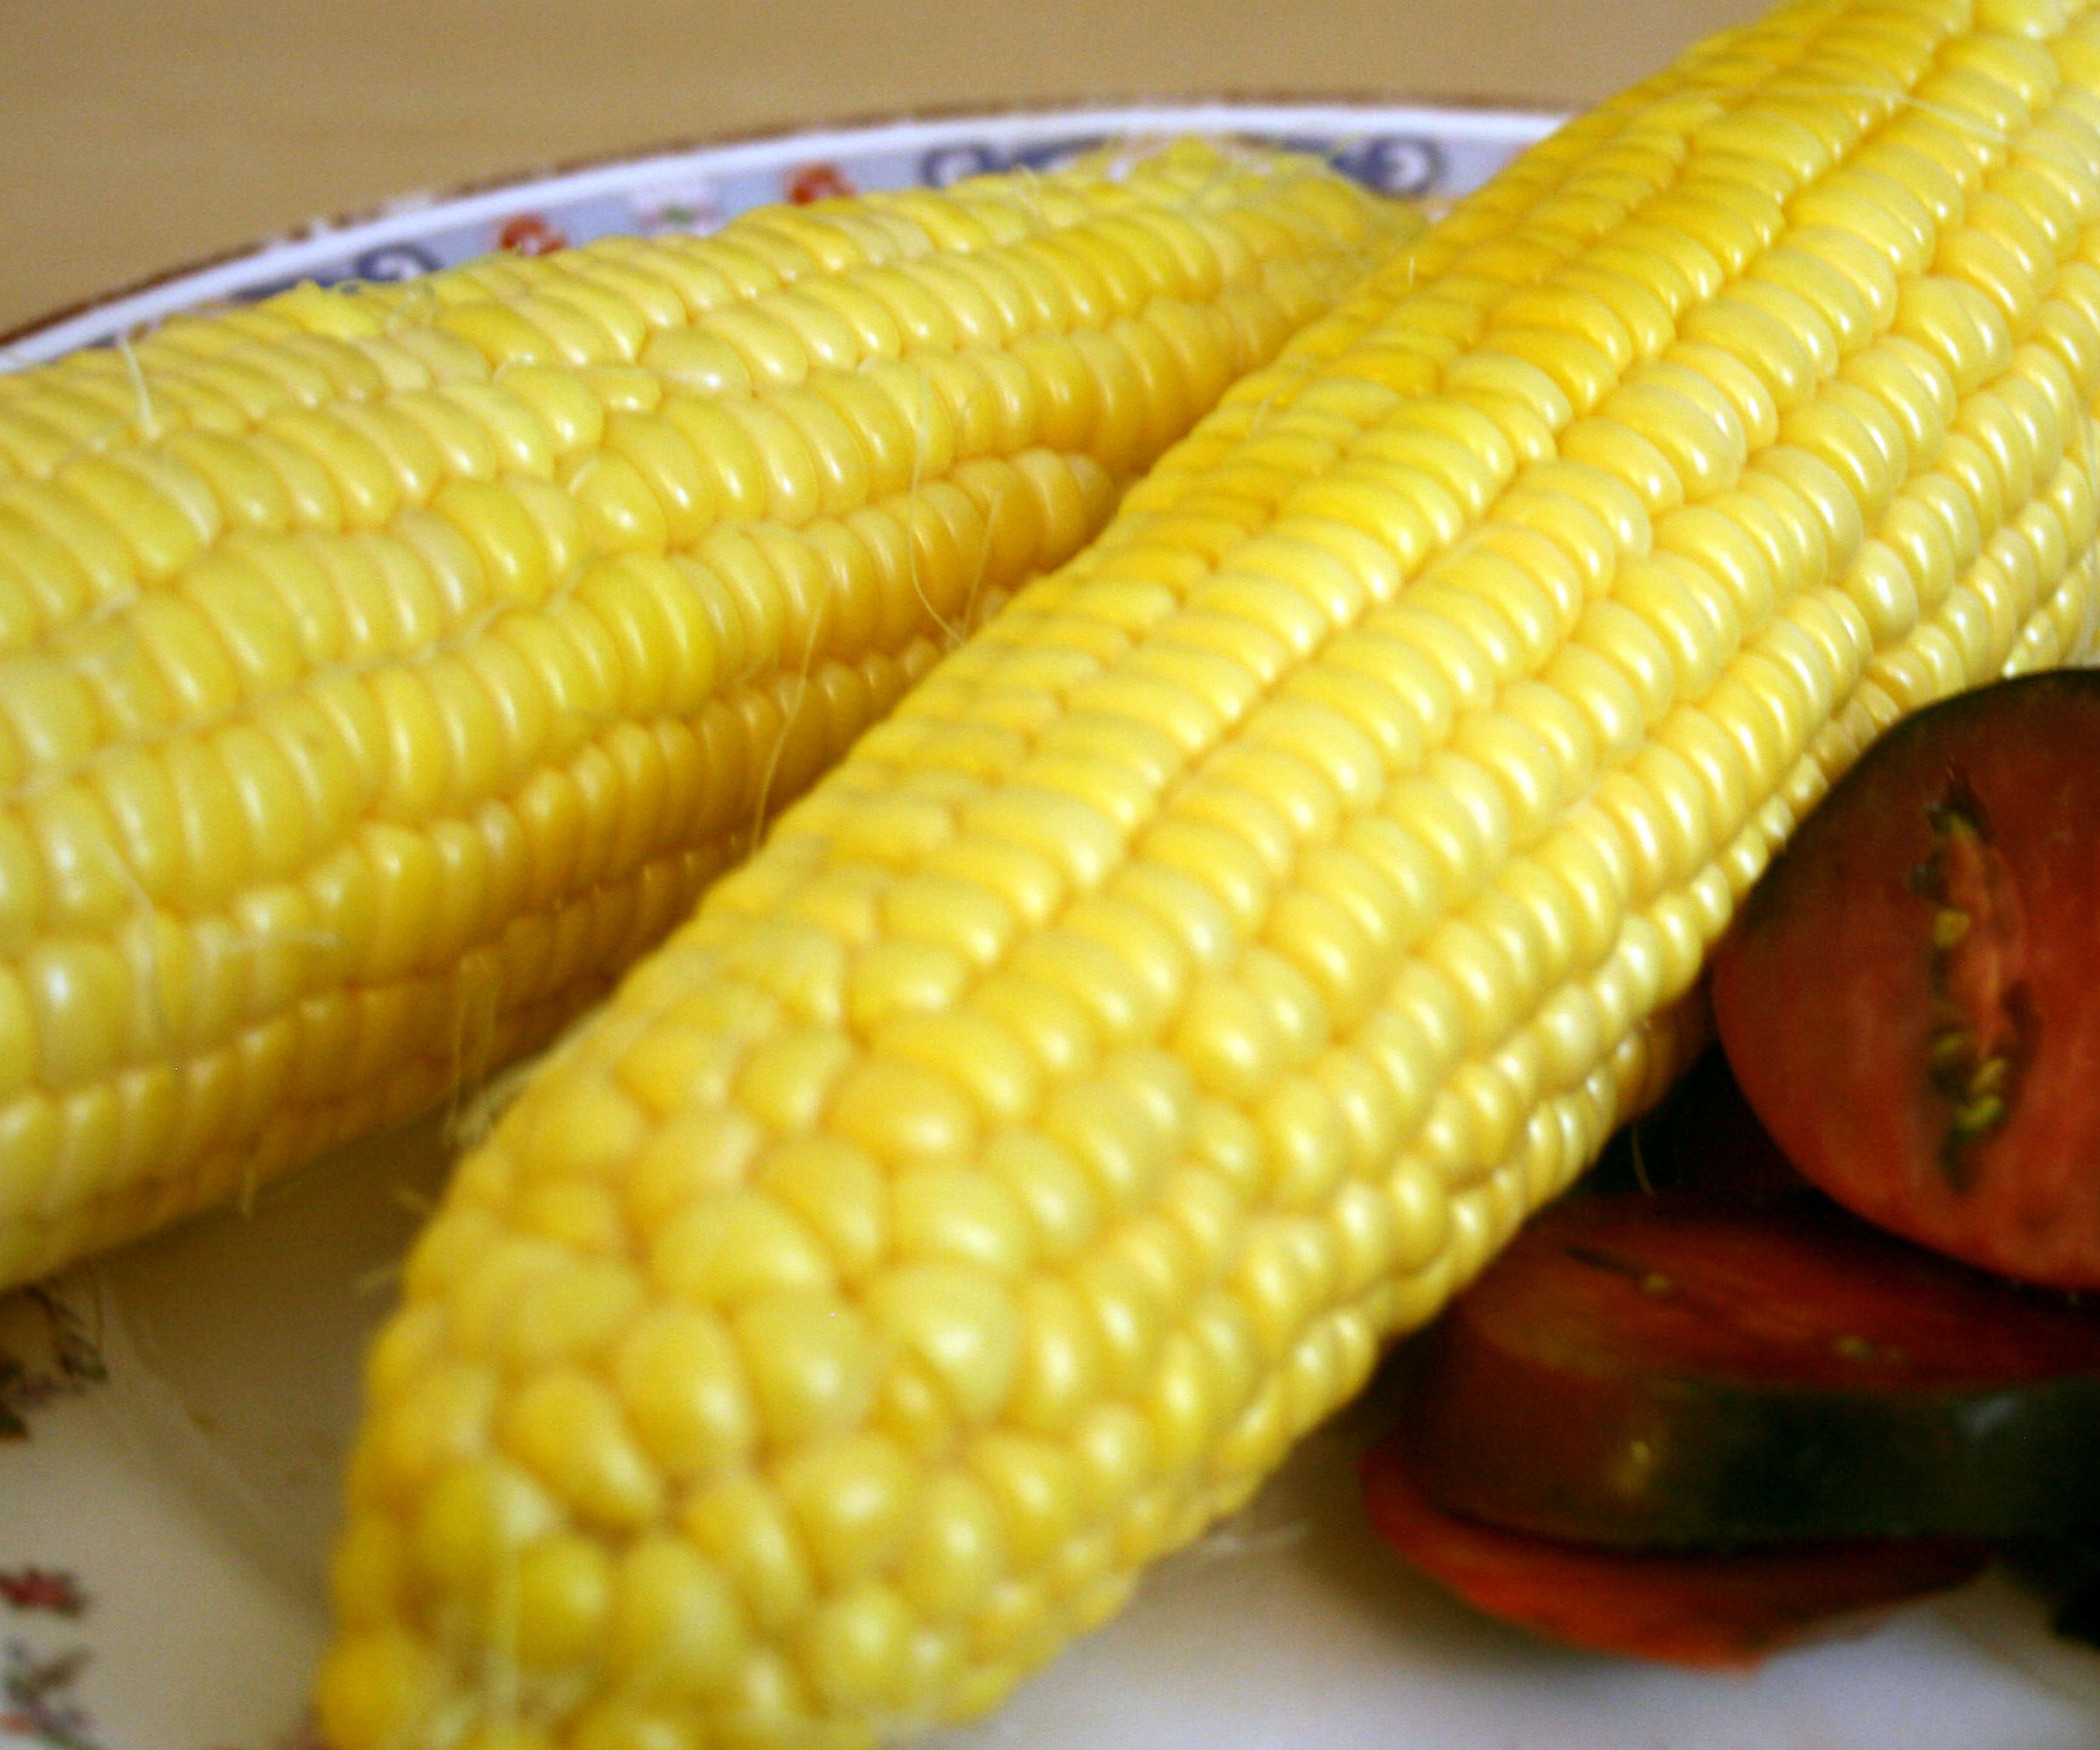 Microwave Corn In Husk
 microwave corn on the cob without husk recipe